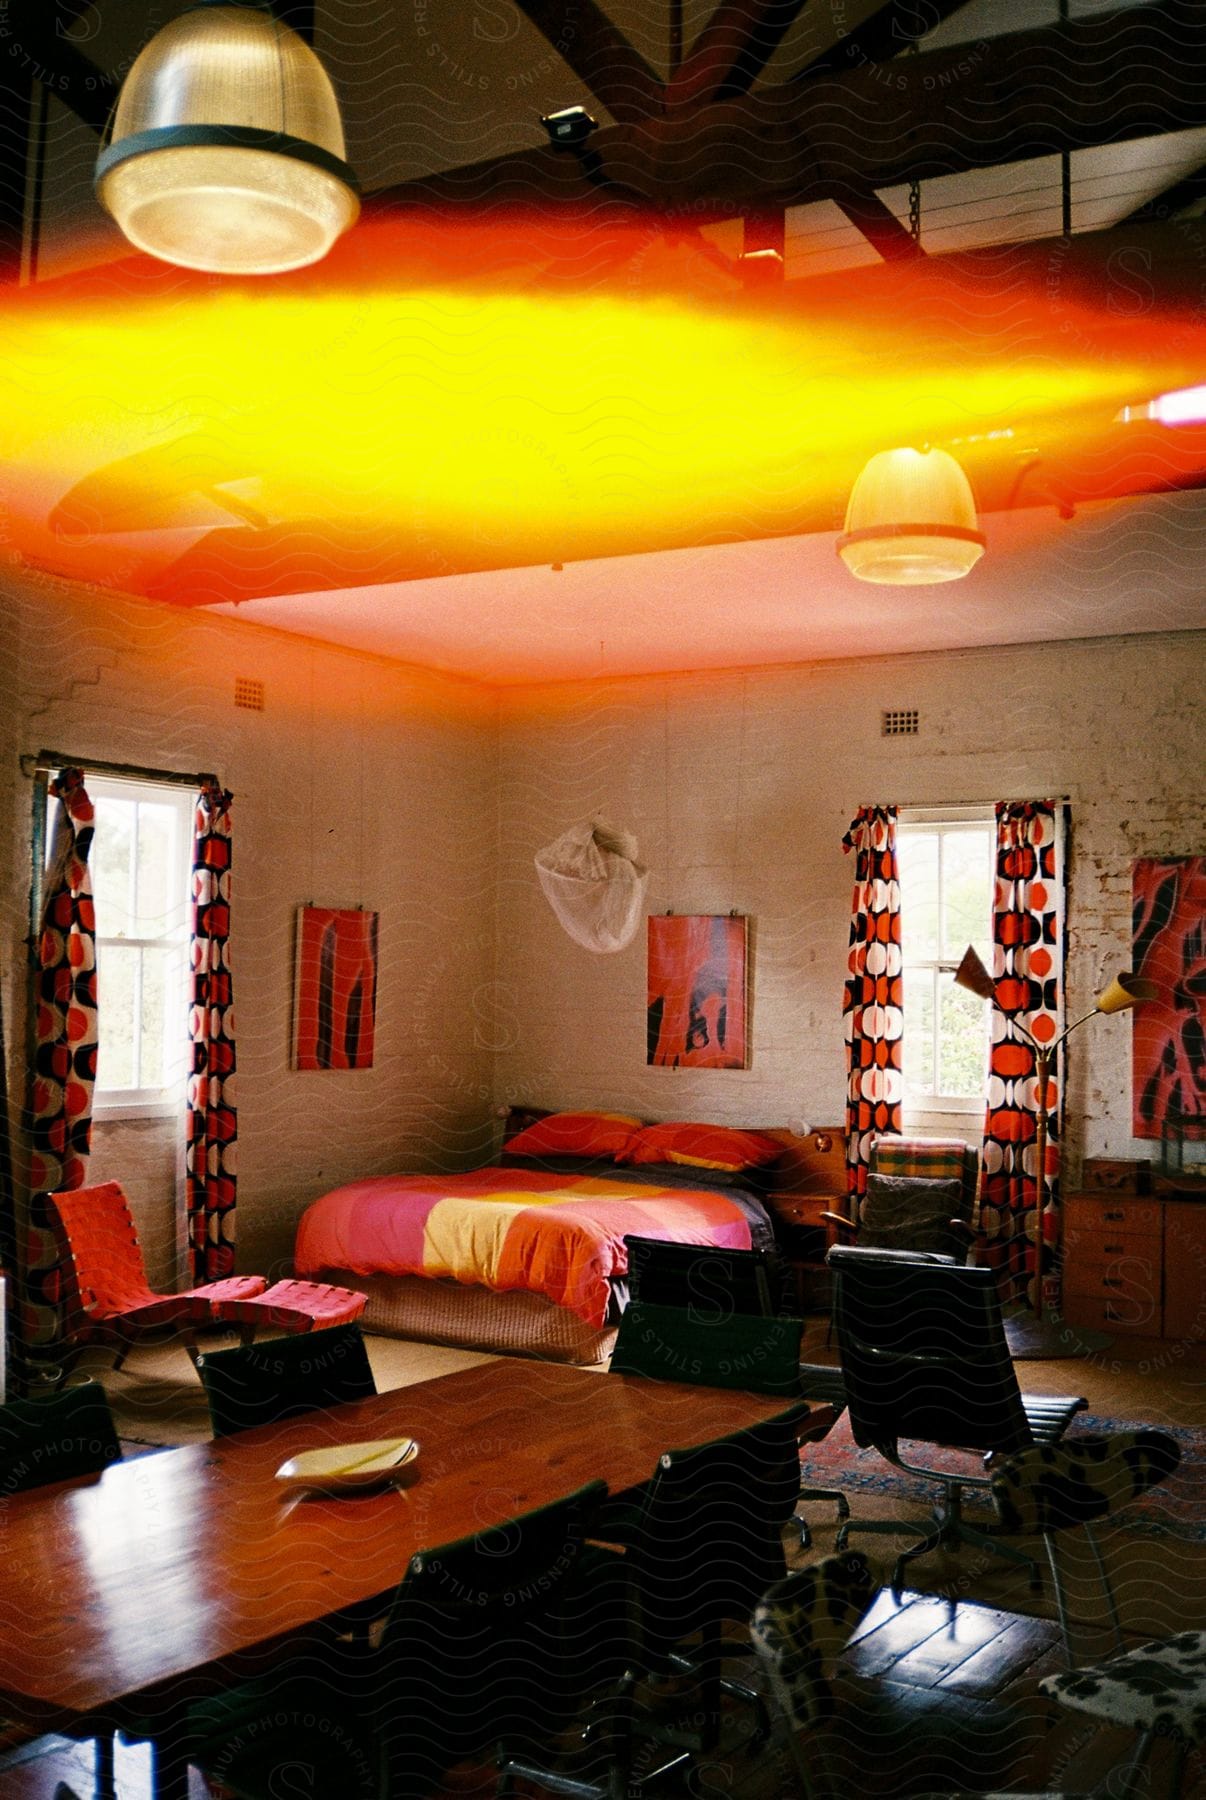 Interior of a bedroom with bright orange lighting, featuring a bed with red and orange bedding and curtains with a circular pattern. A wooden desk with chairs and a ceiling lamp is in the foreground.